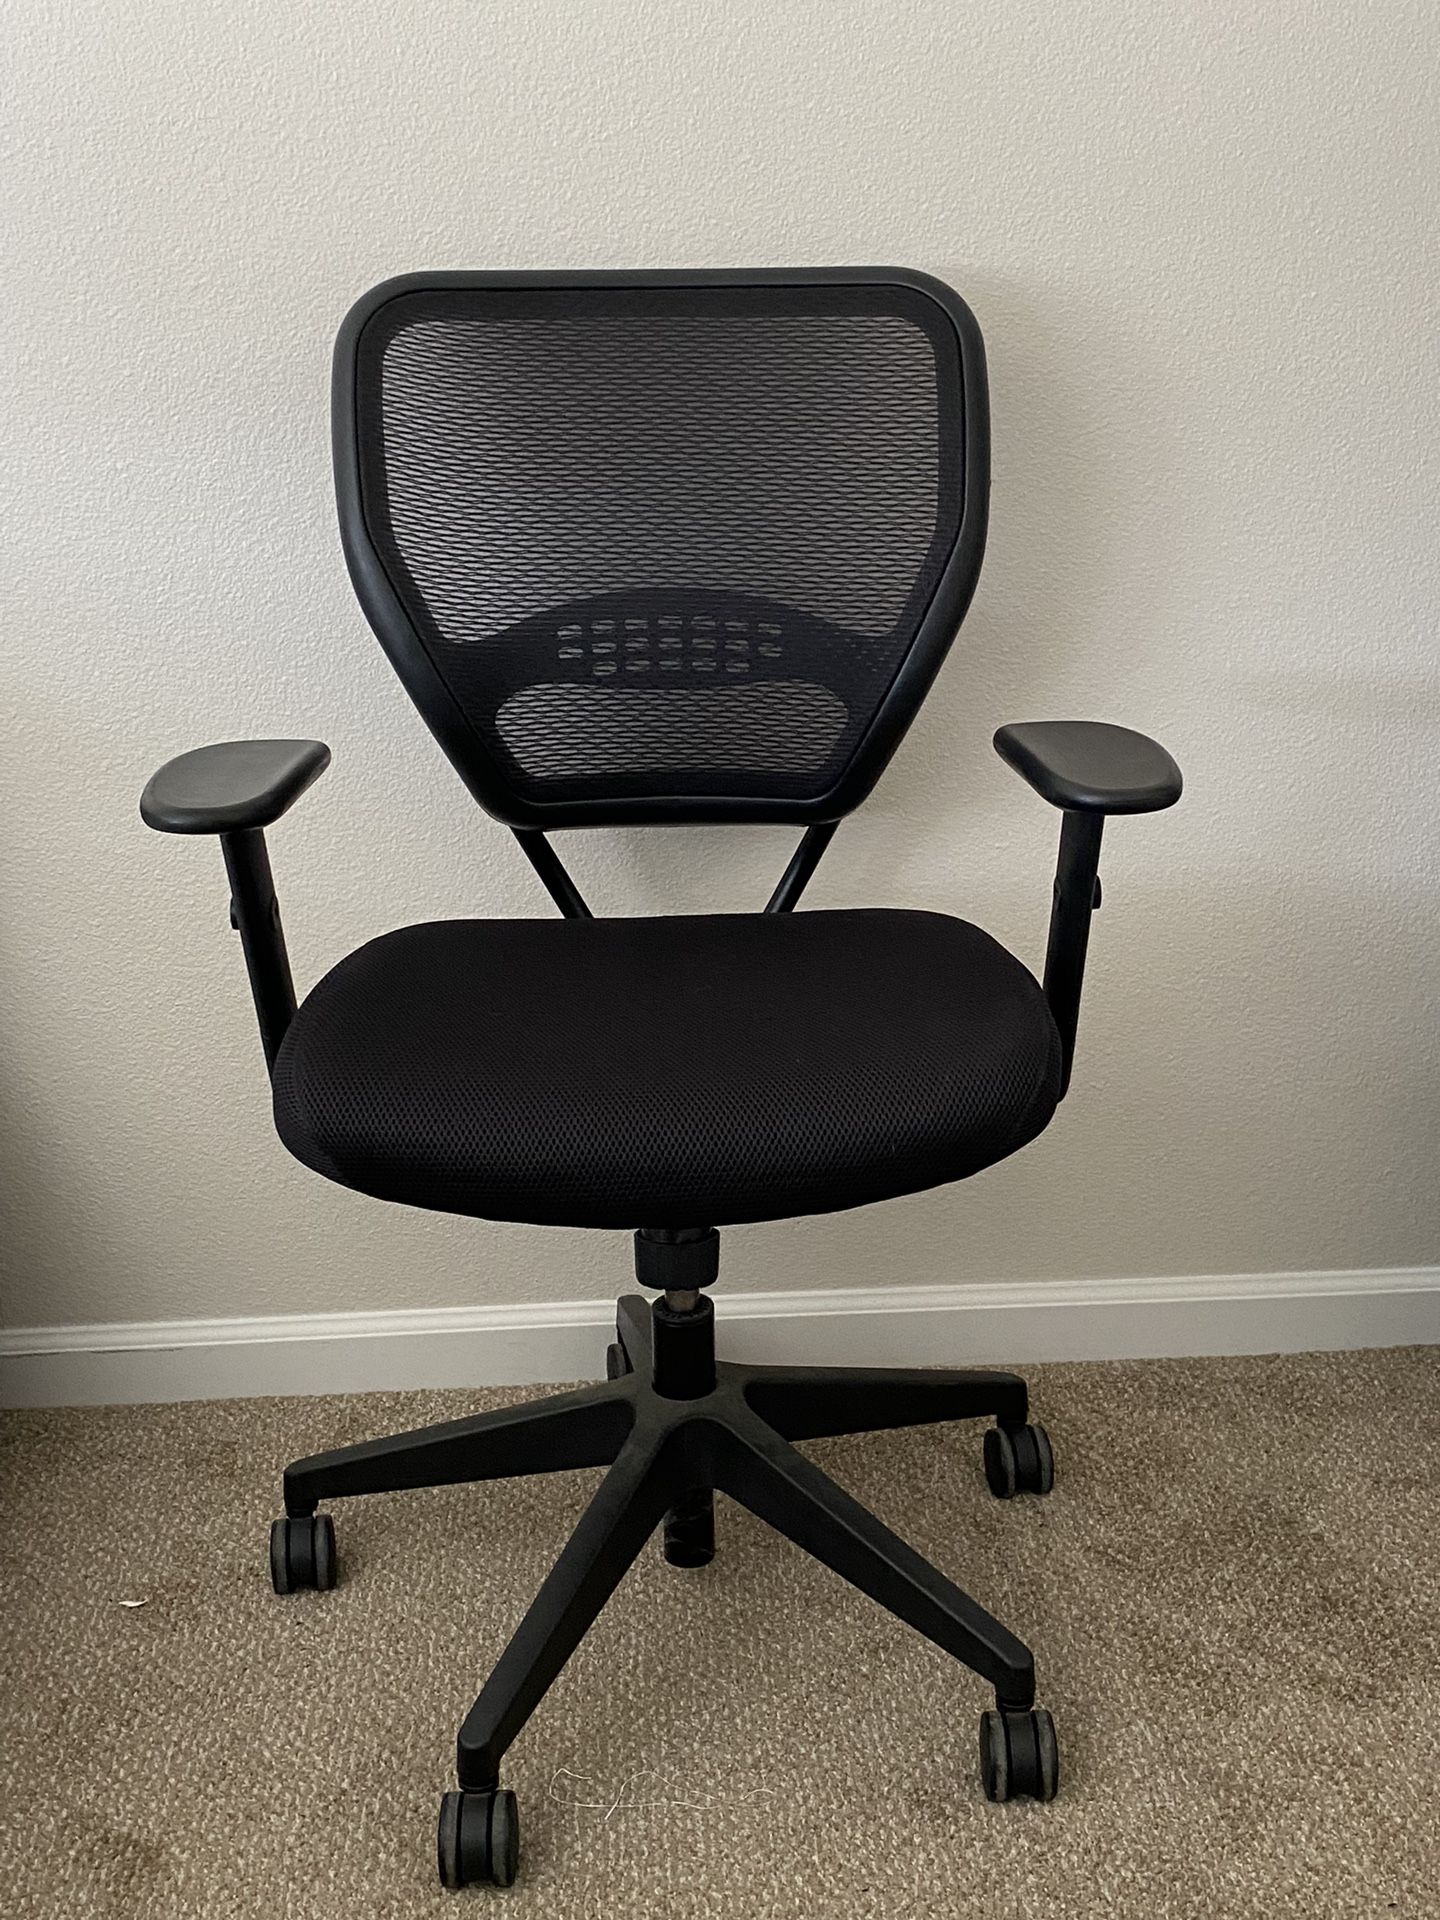 $30 OFFICE CHAIR 